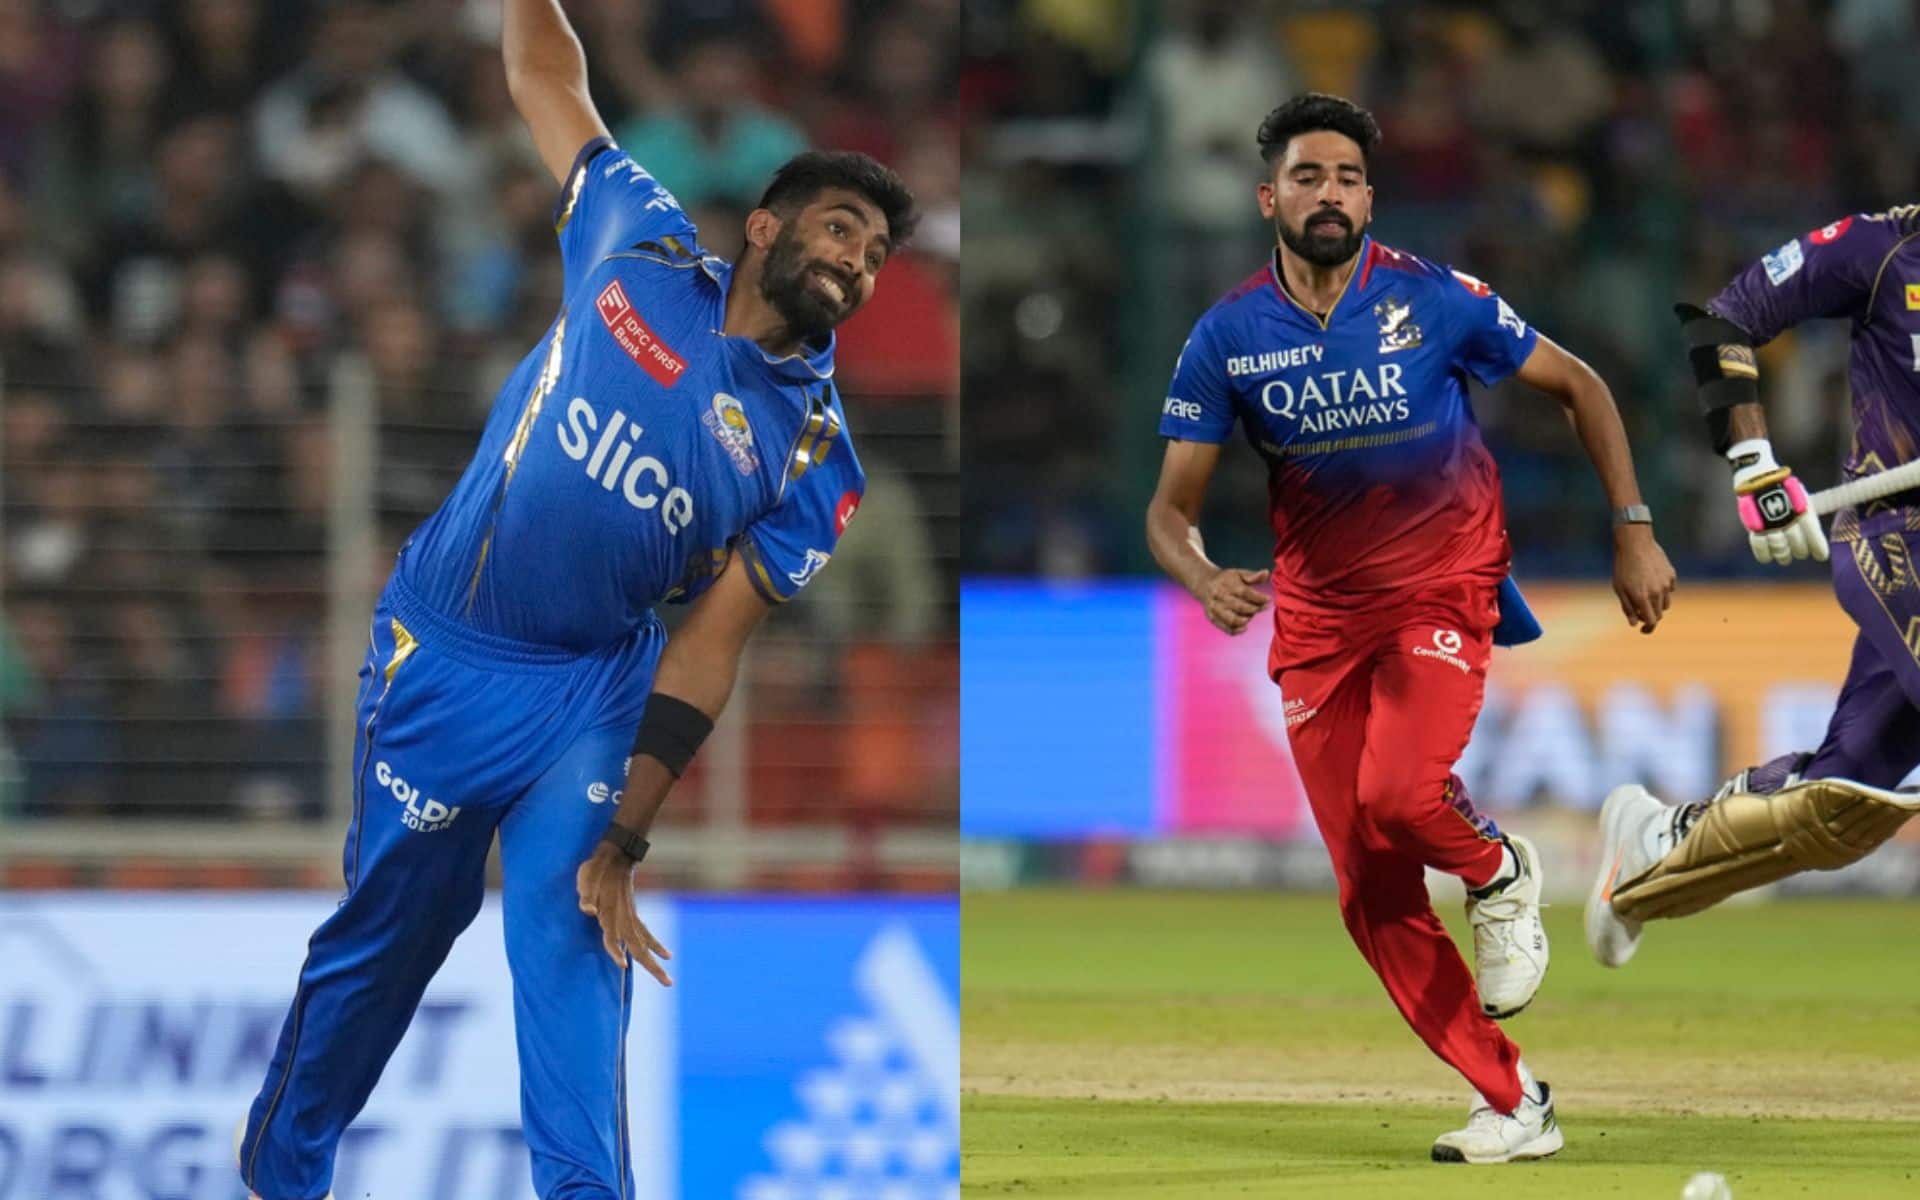 Jasprit Bumrah and Momhammed Siraj could be crucial to their team's success in the match [AP Photos]